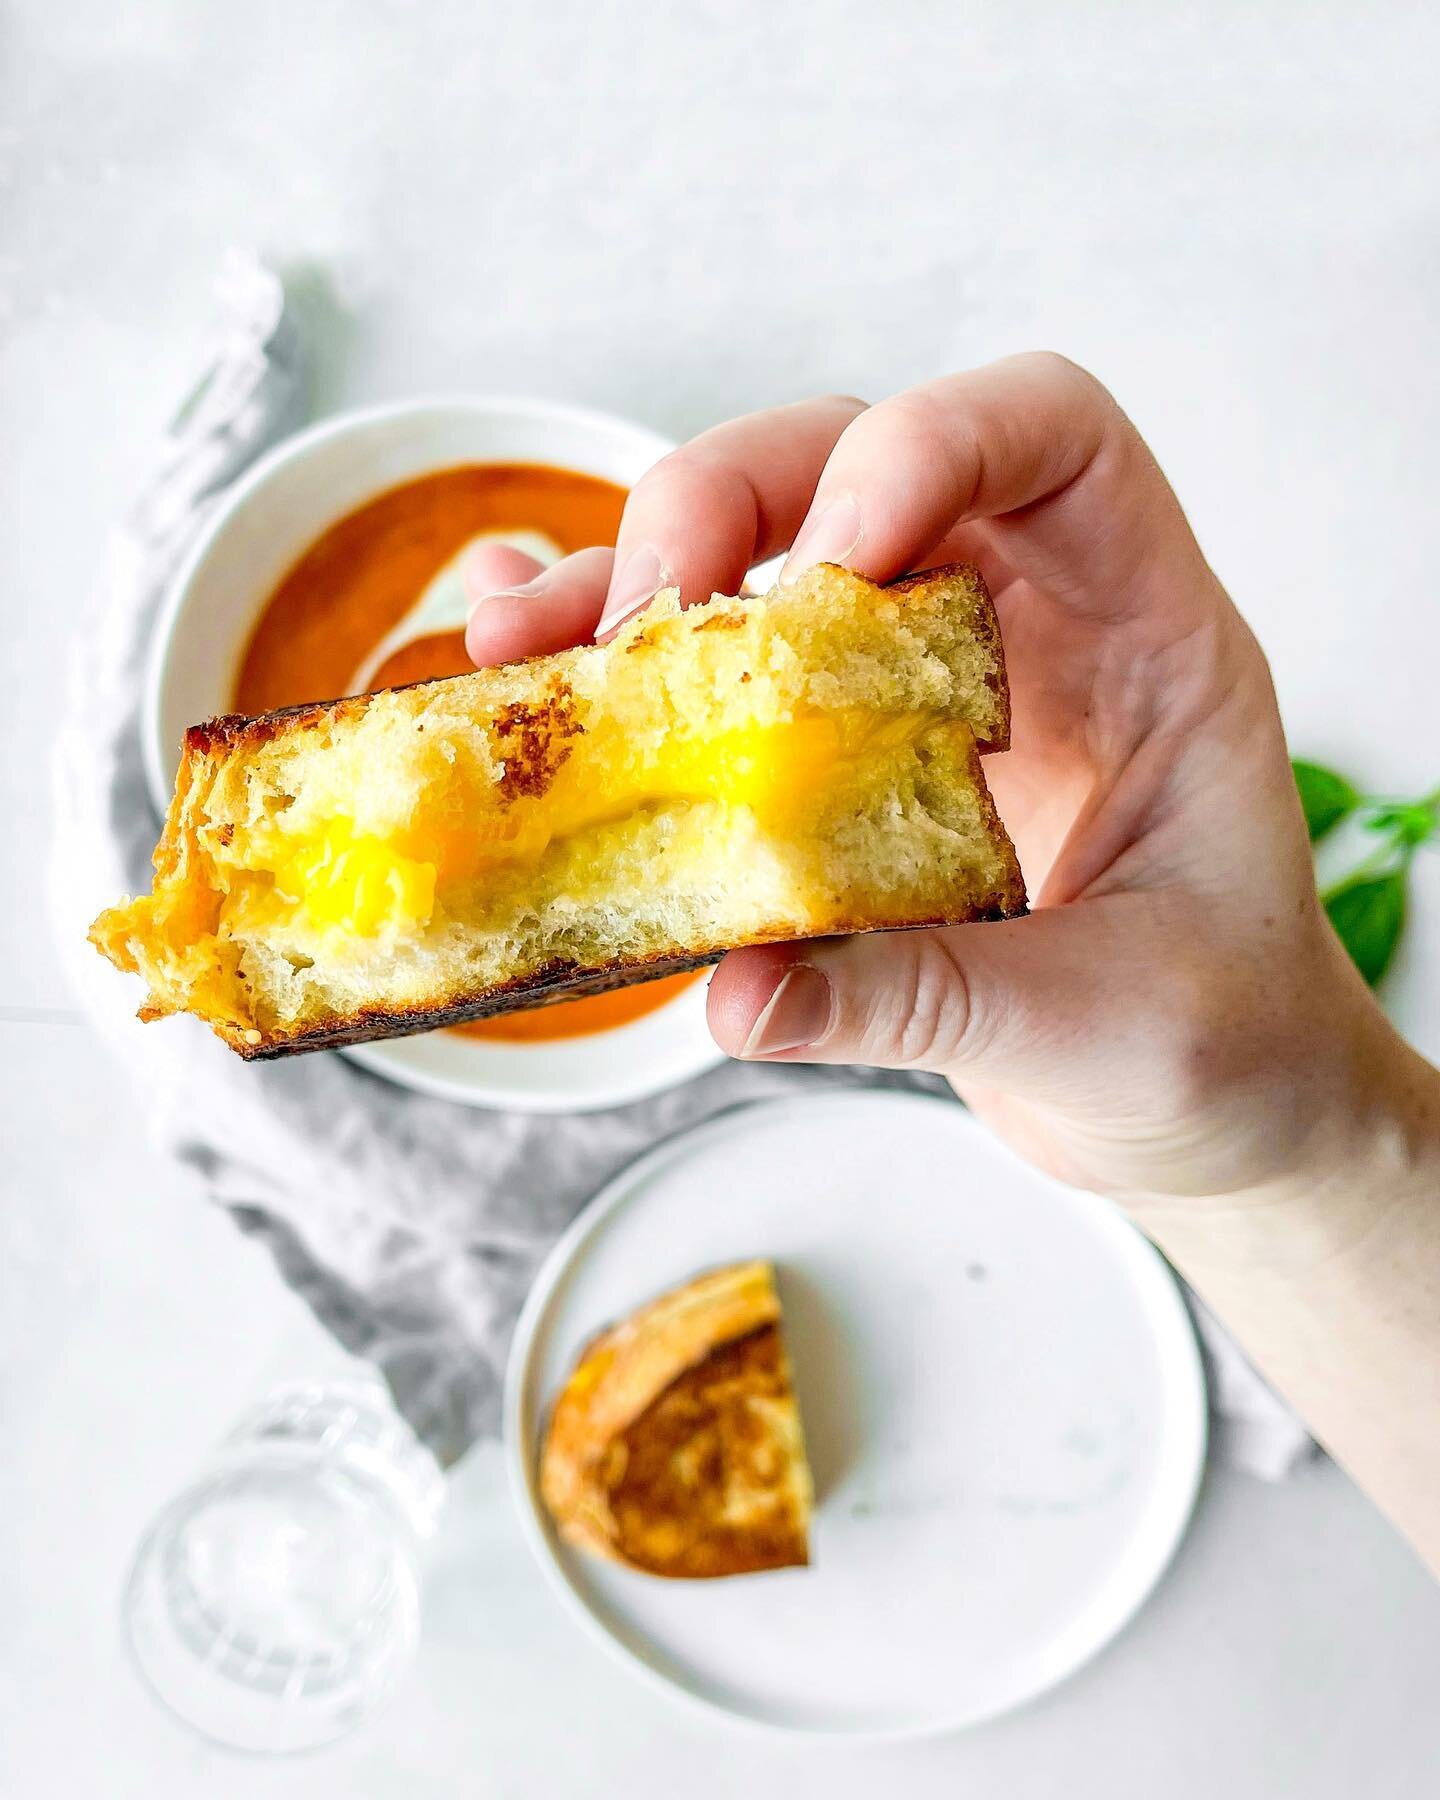 Today sounds like a grilled cheese and tomato soup kinda day 🙌🏻

I&rsquo;ve been on the hunt for good dairy-free options for cheeses to incorporate in recipes and having been loving the brand @violife_foods. These &ldquo;Mature Cheddar Slices&rdquo